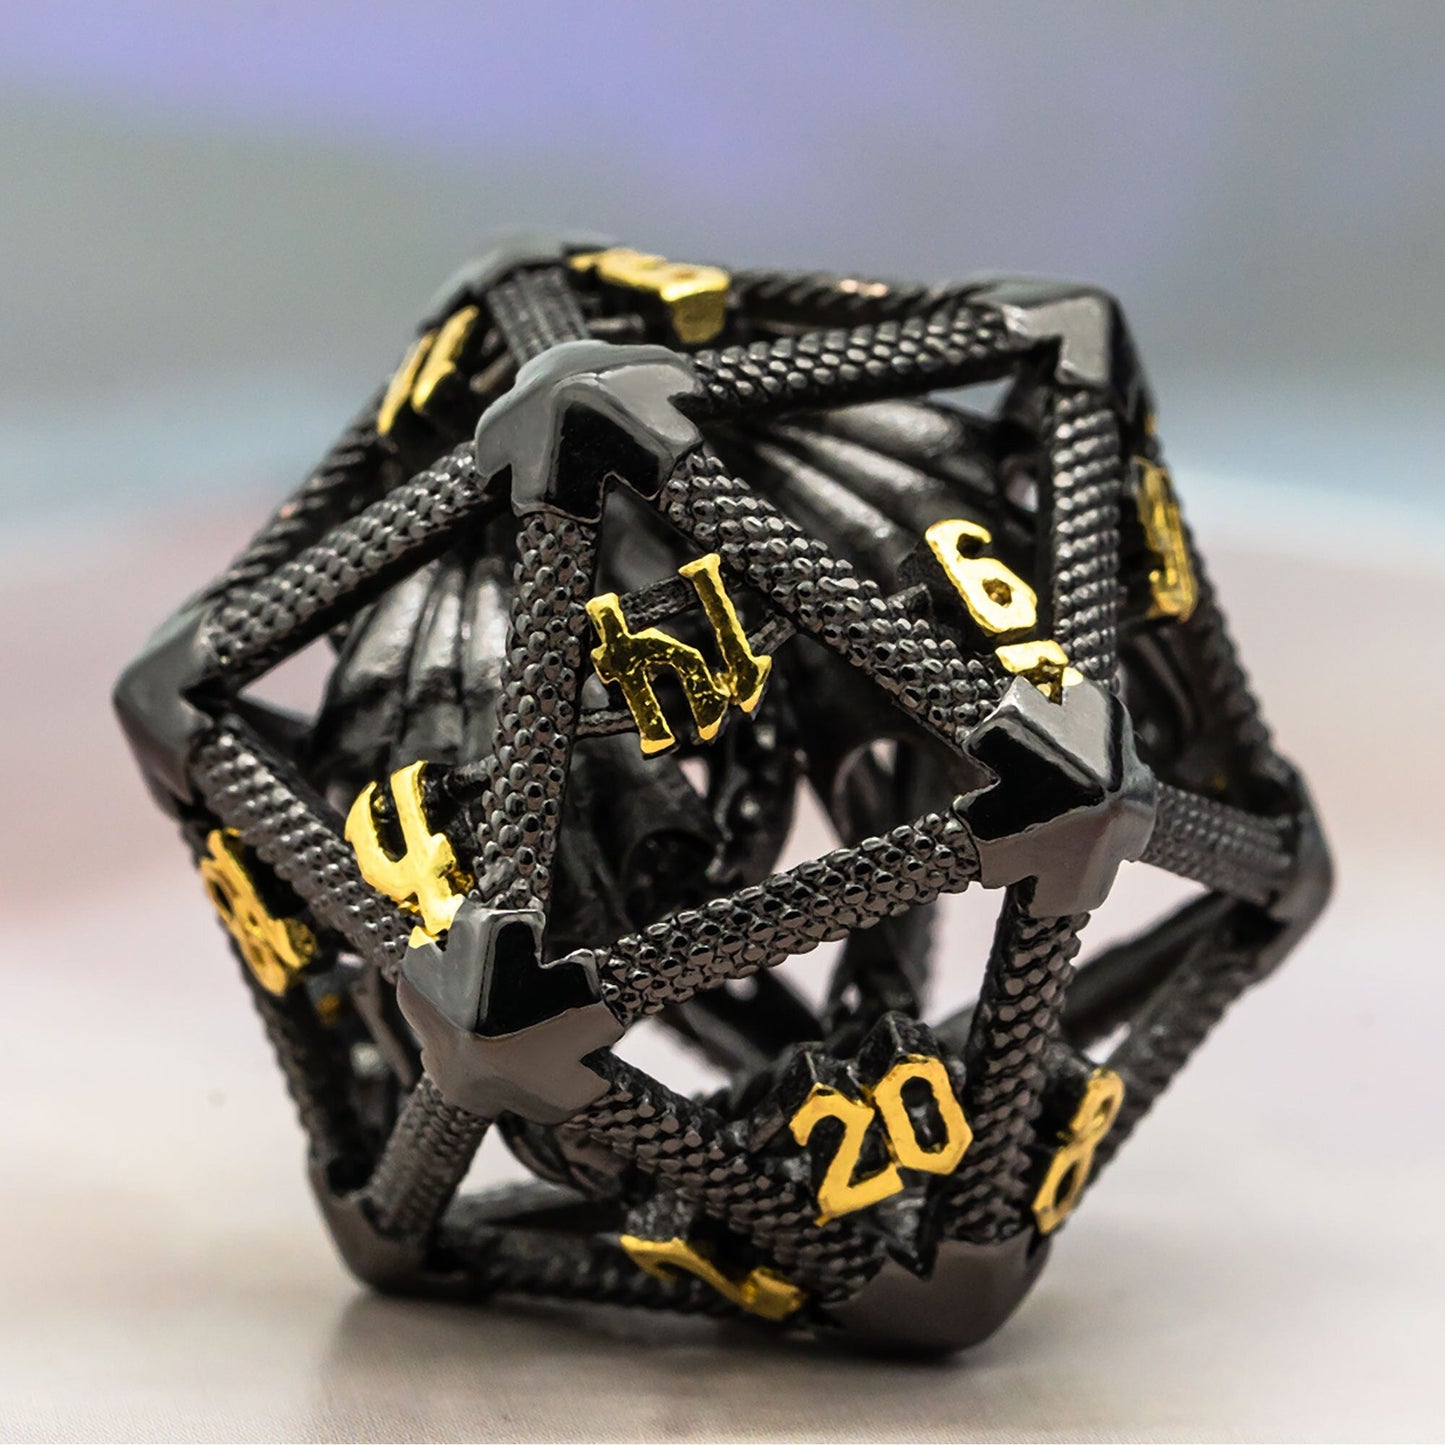 Black hollow metal d20 with gold numbers